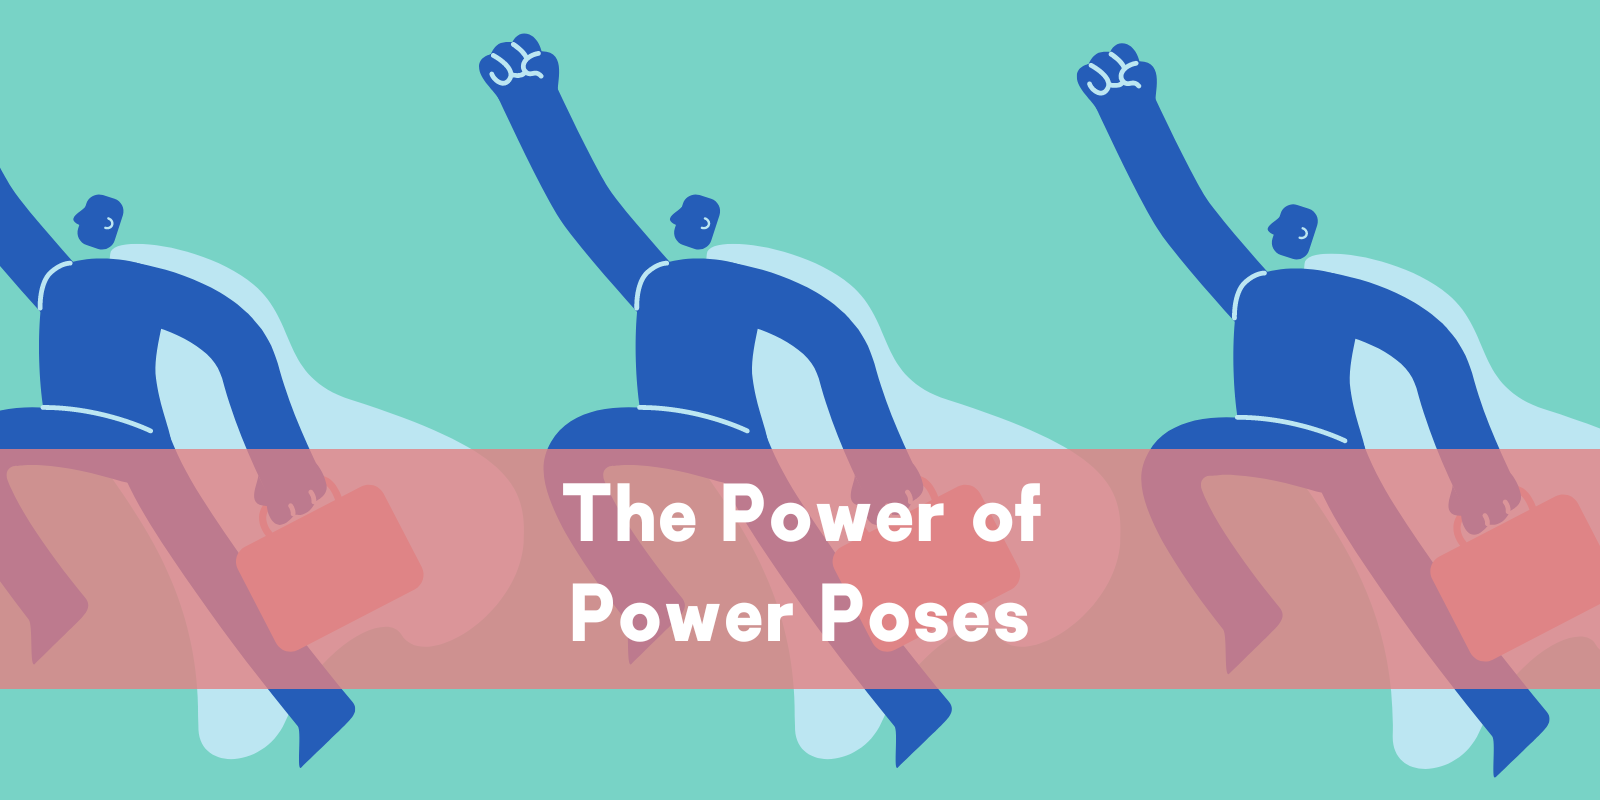 Feel More Confident Before Interviews With These 'Power Poses' - Your World